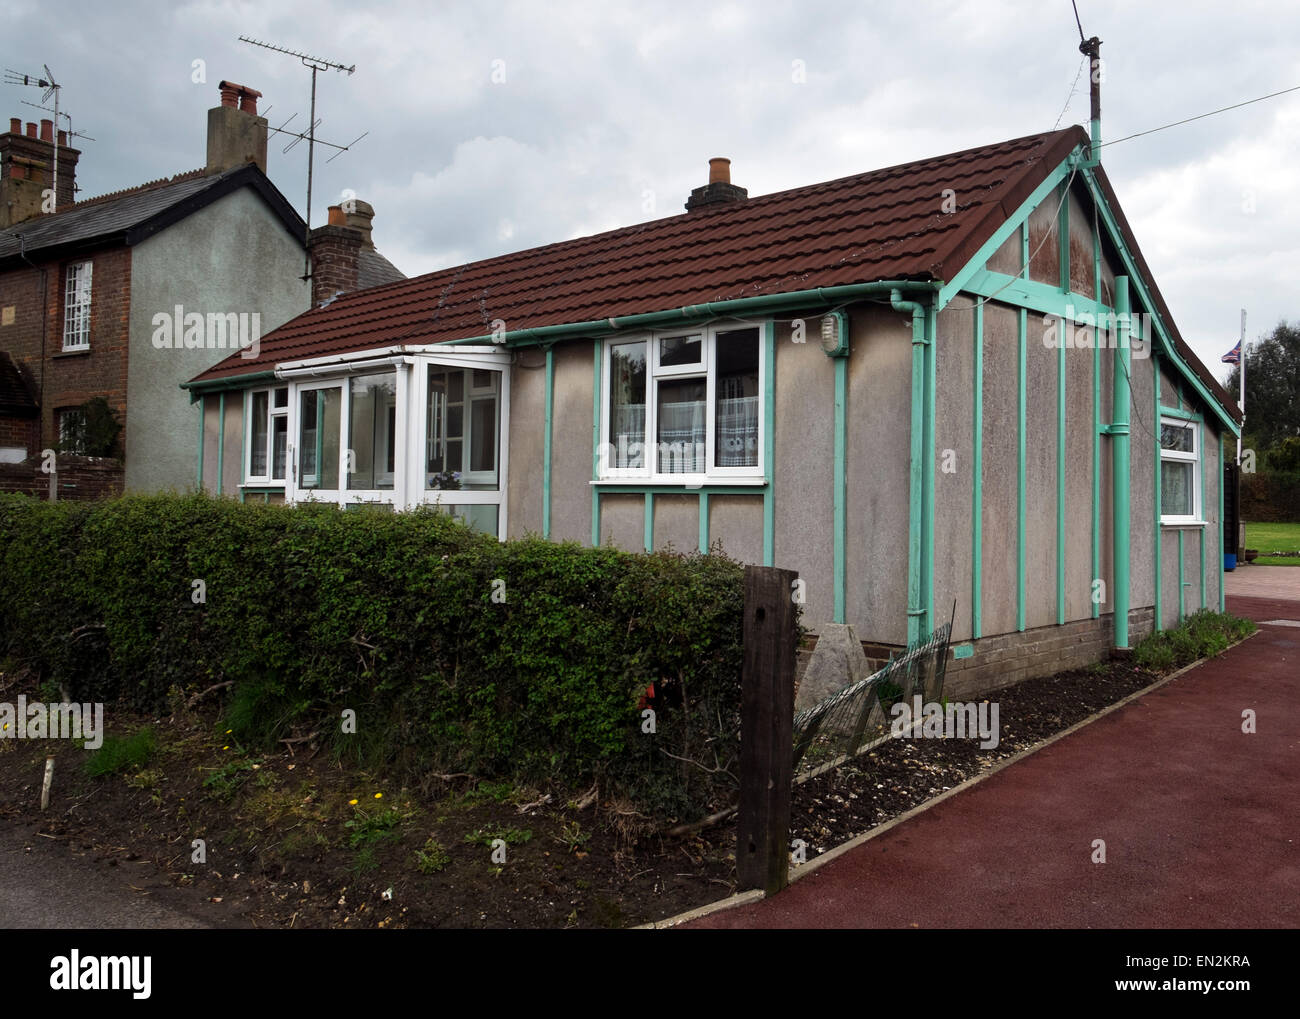 A post second world war prefab single storey bungalow still lived in today in Buckinghamshire UK Stock Photo